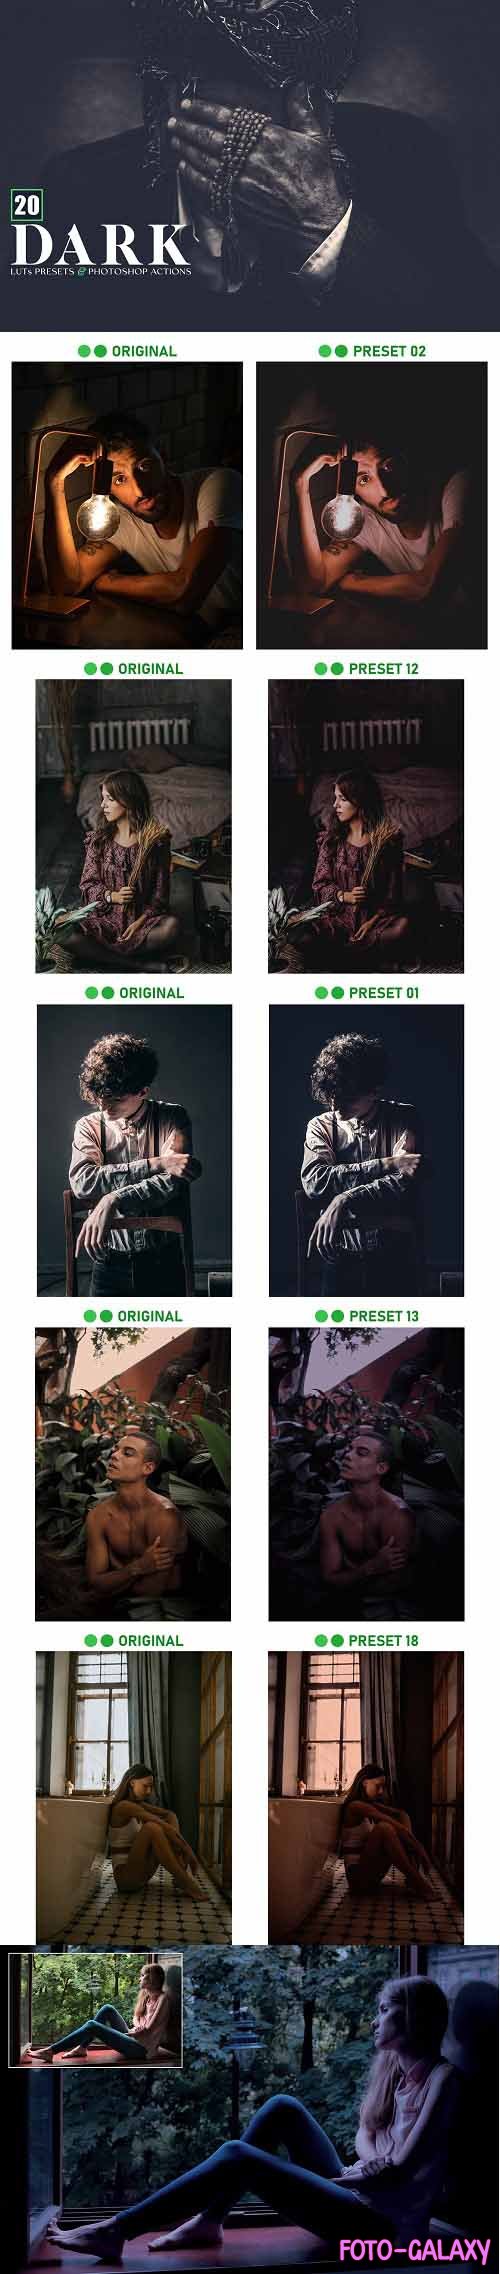 Dark LUTs Presets and Photoshop Action - 6919409